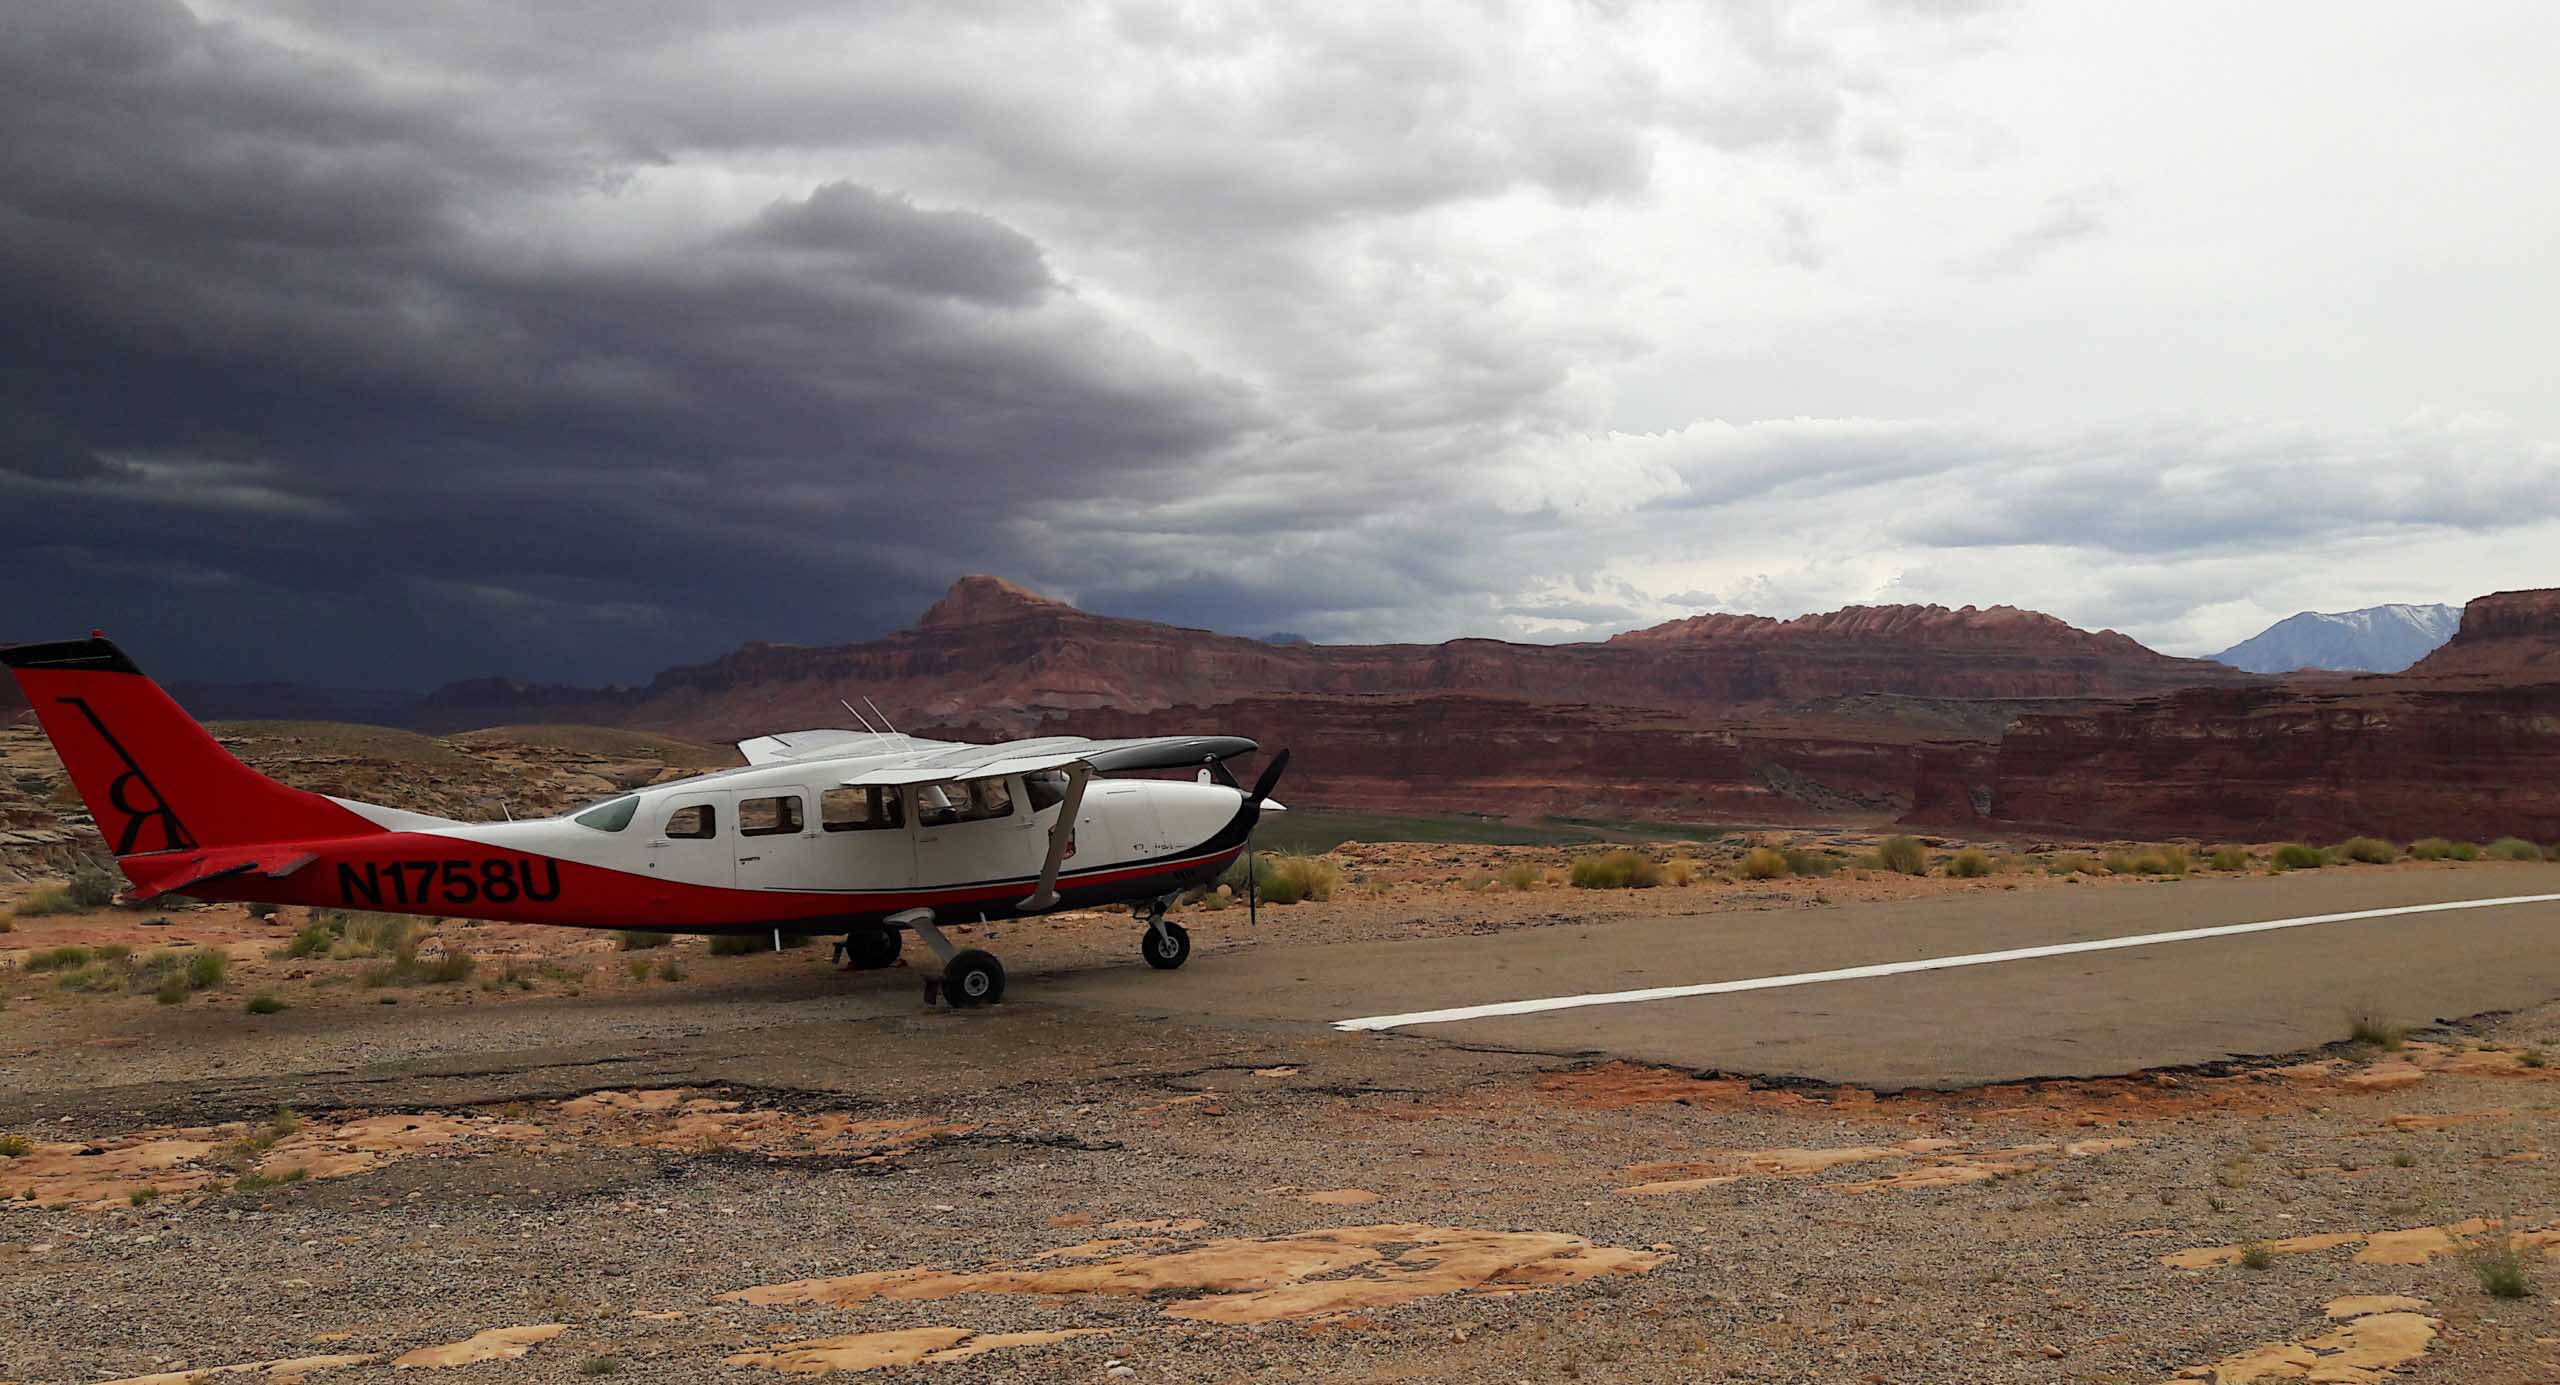 Redtail Plane in Moab